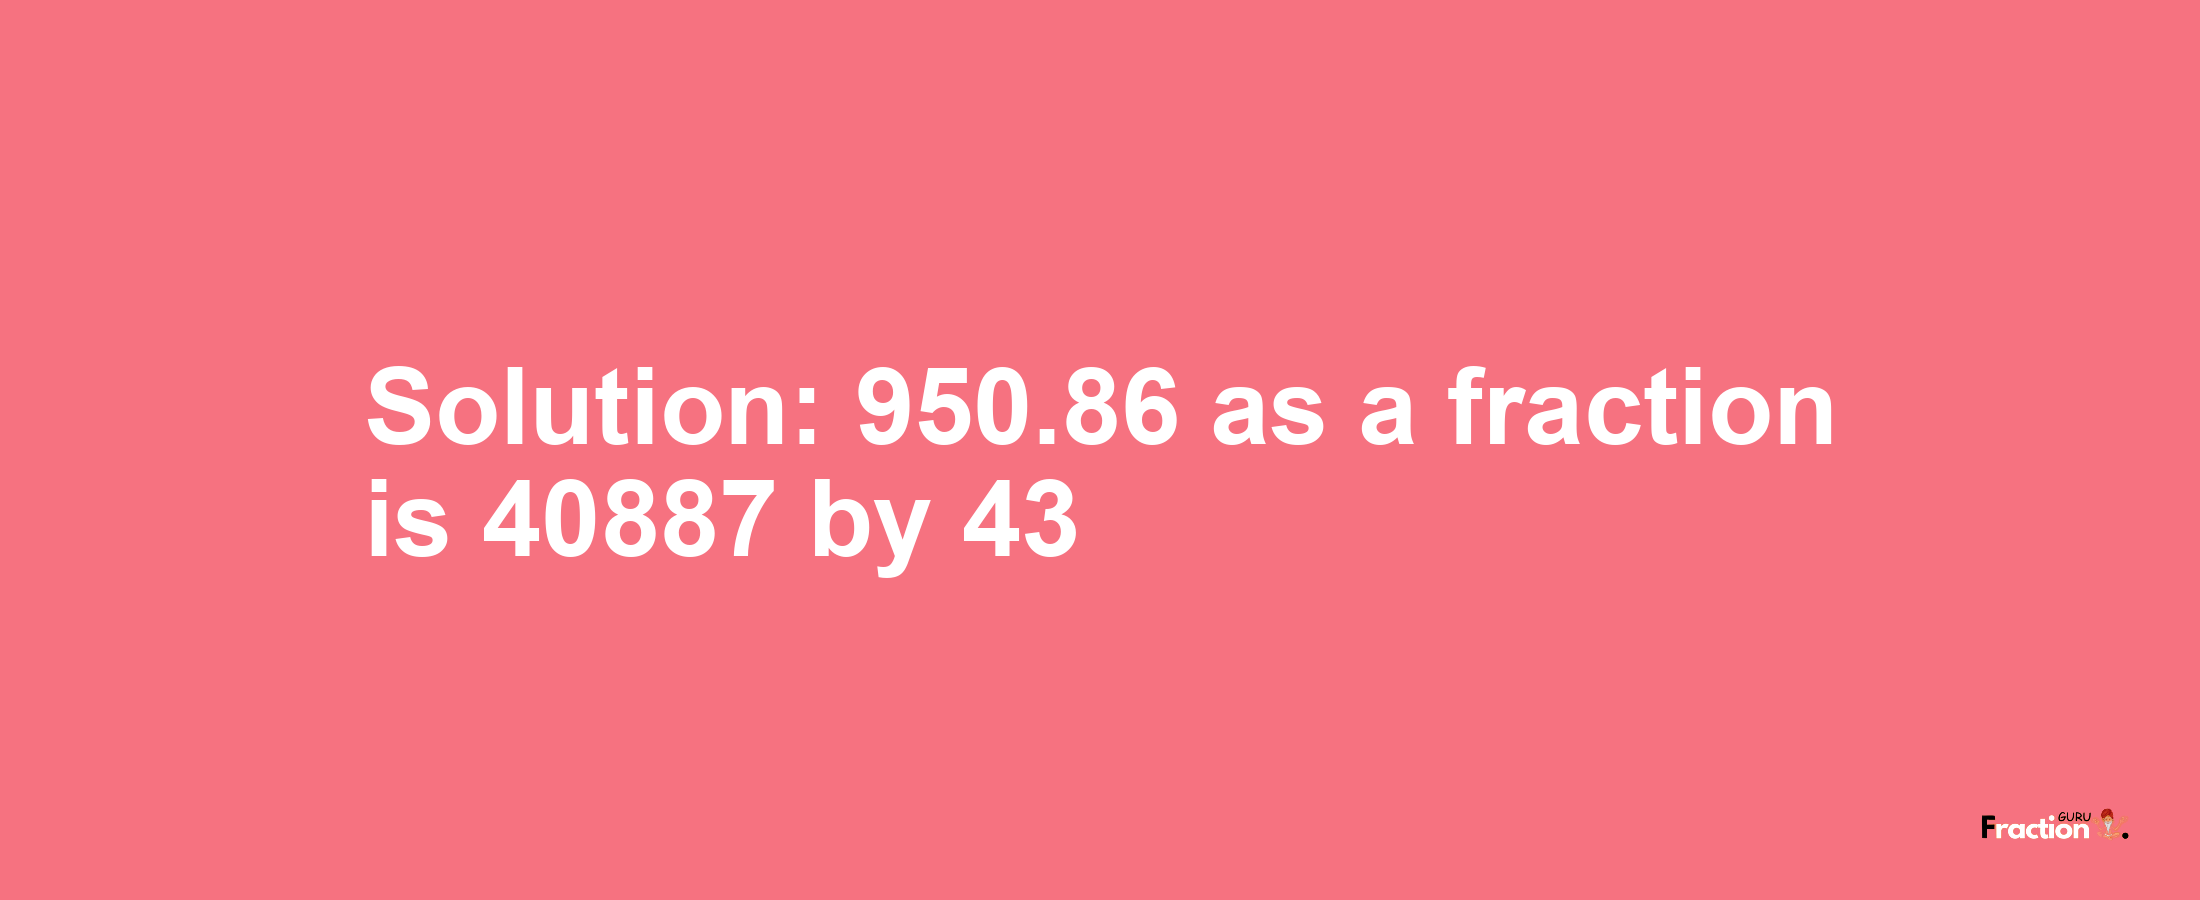 Solution:950.86 as a fraction is 40887/43